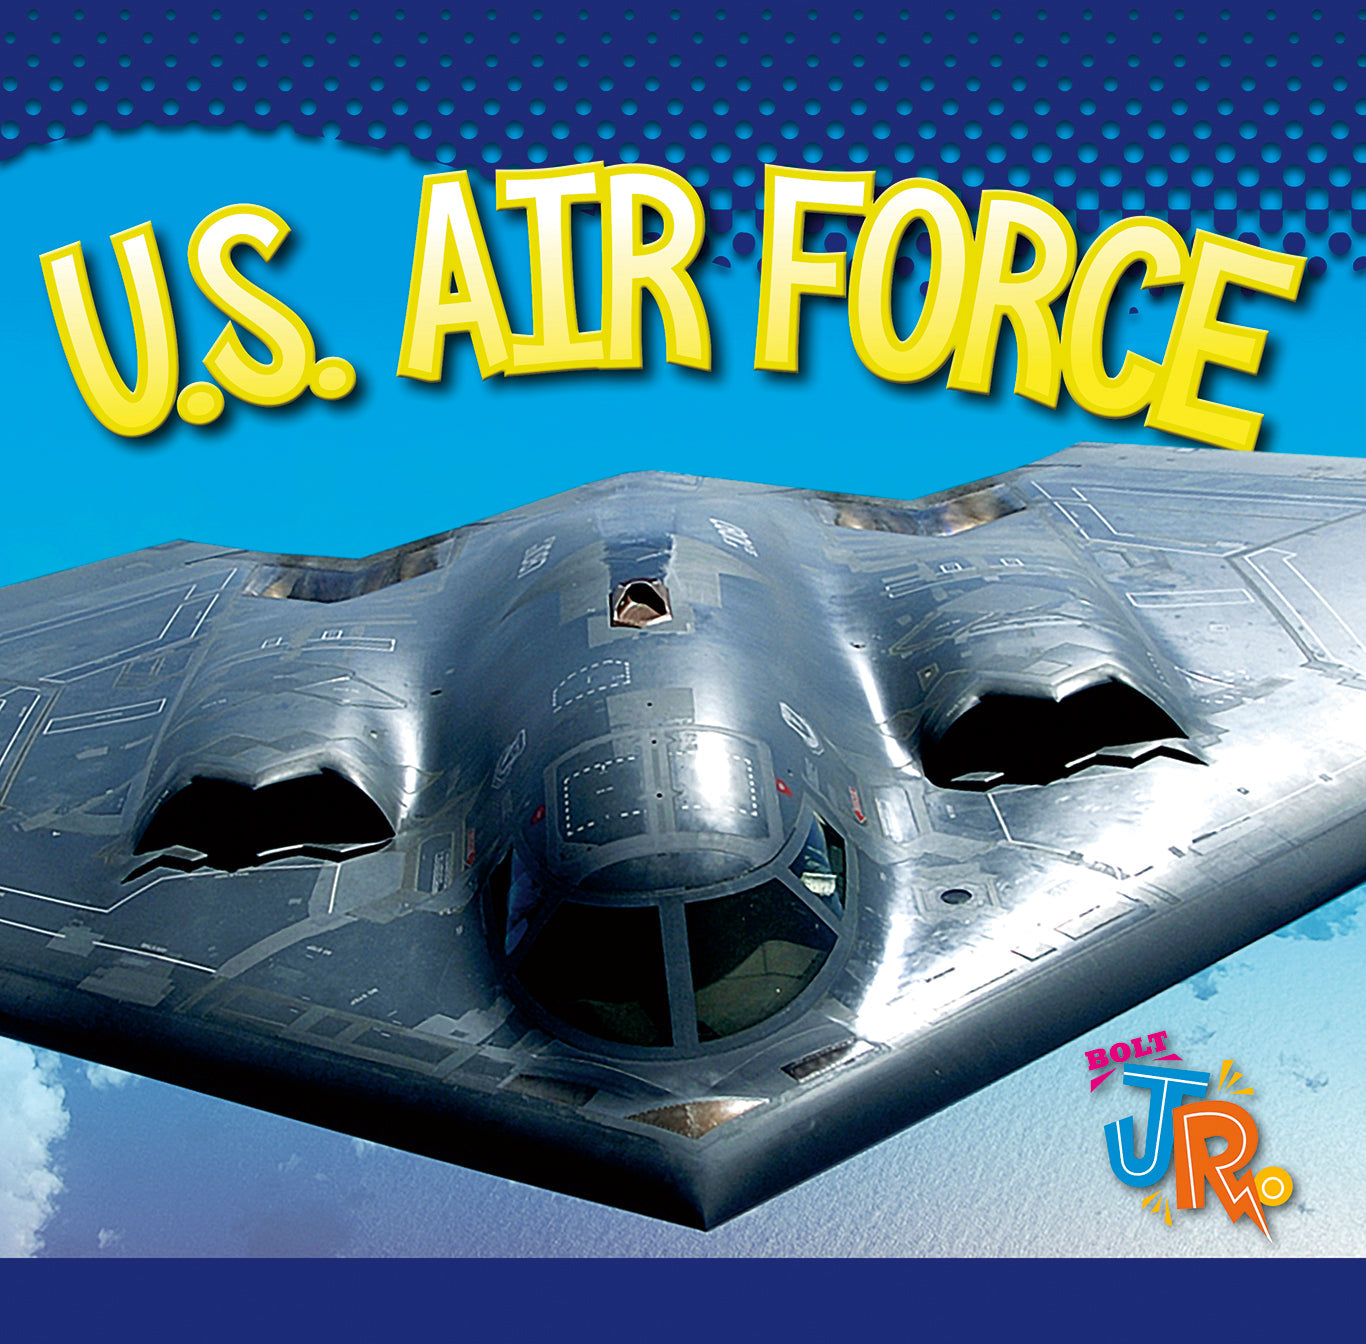 Mighty Military: U.S. Air Force